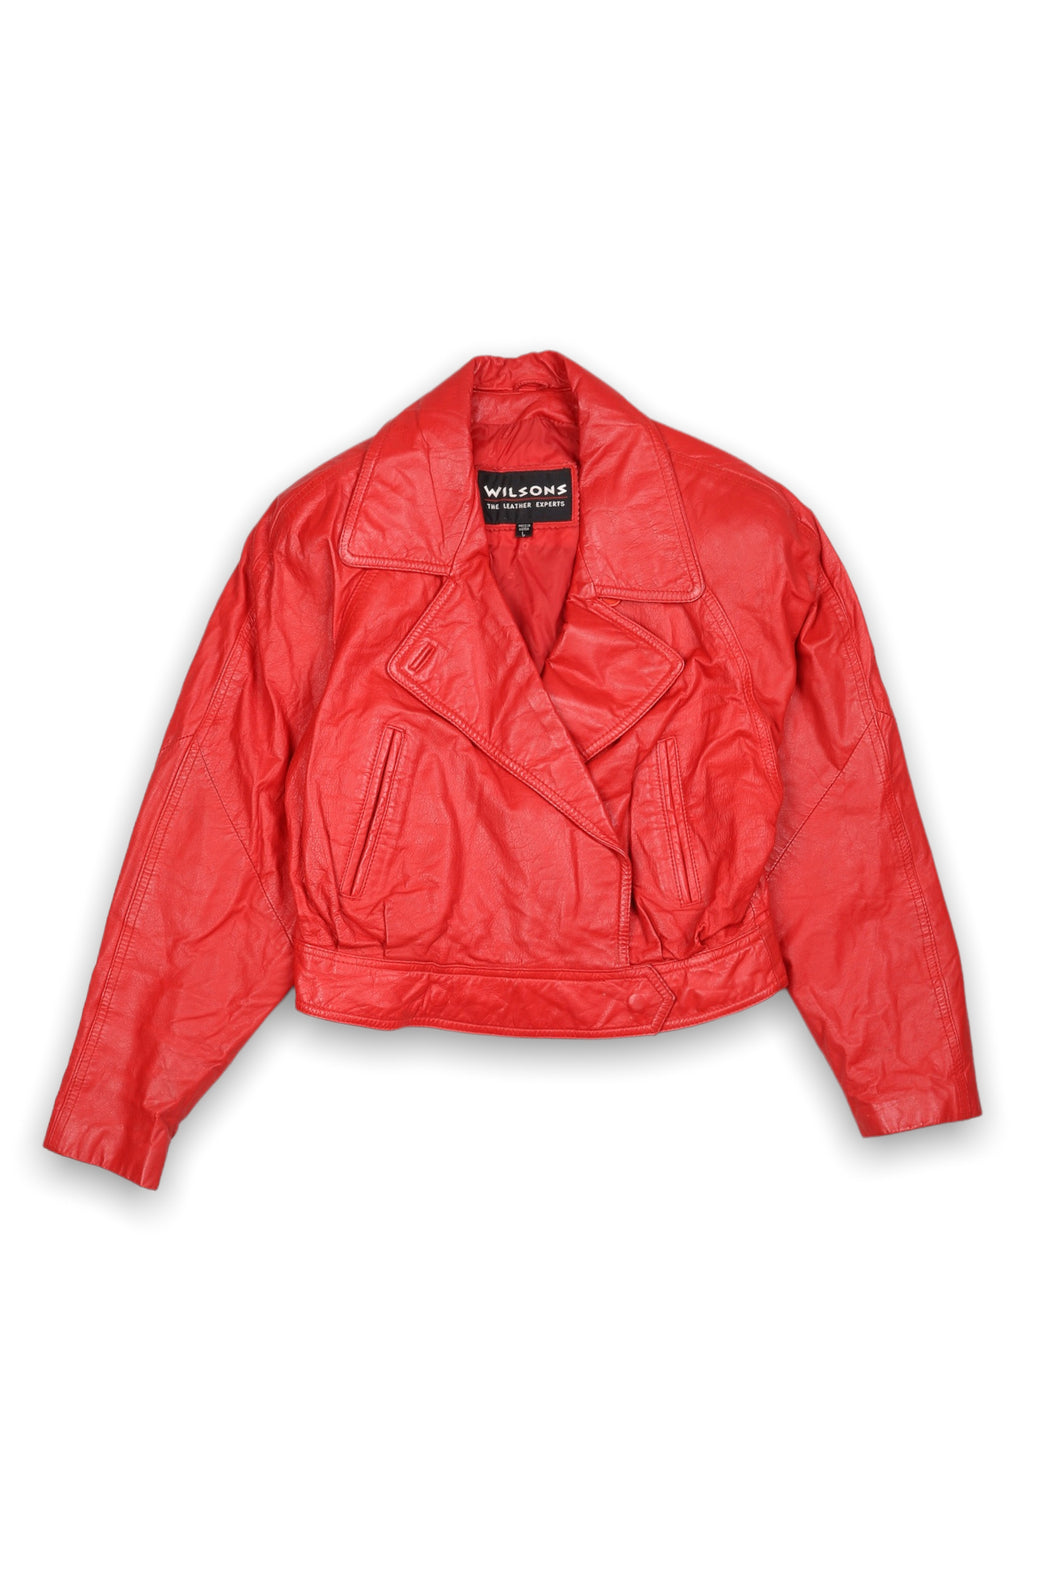 Wilson's Red Leather '80s Cropped Jacket